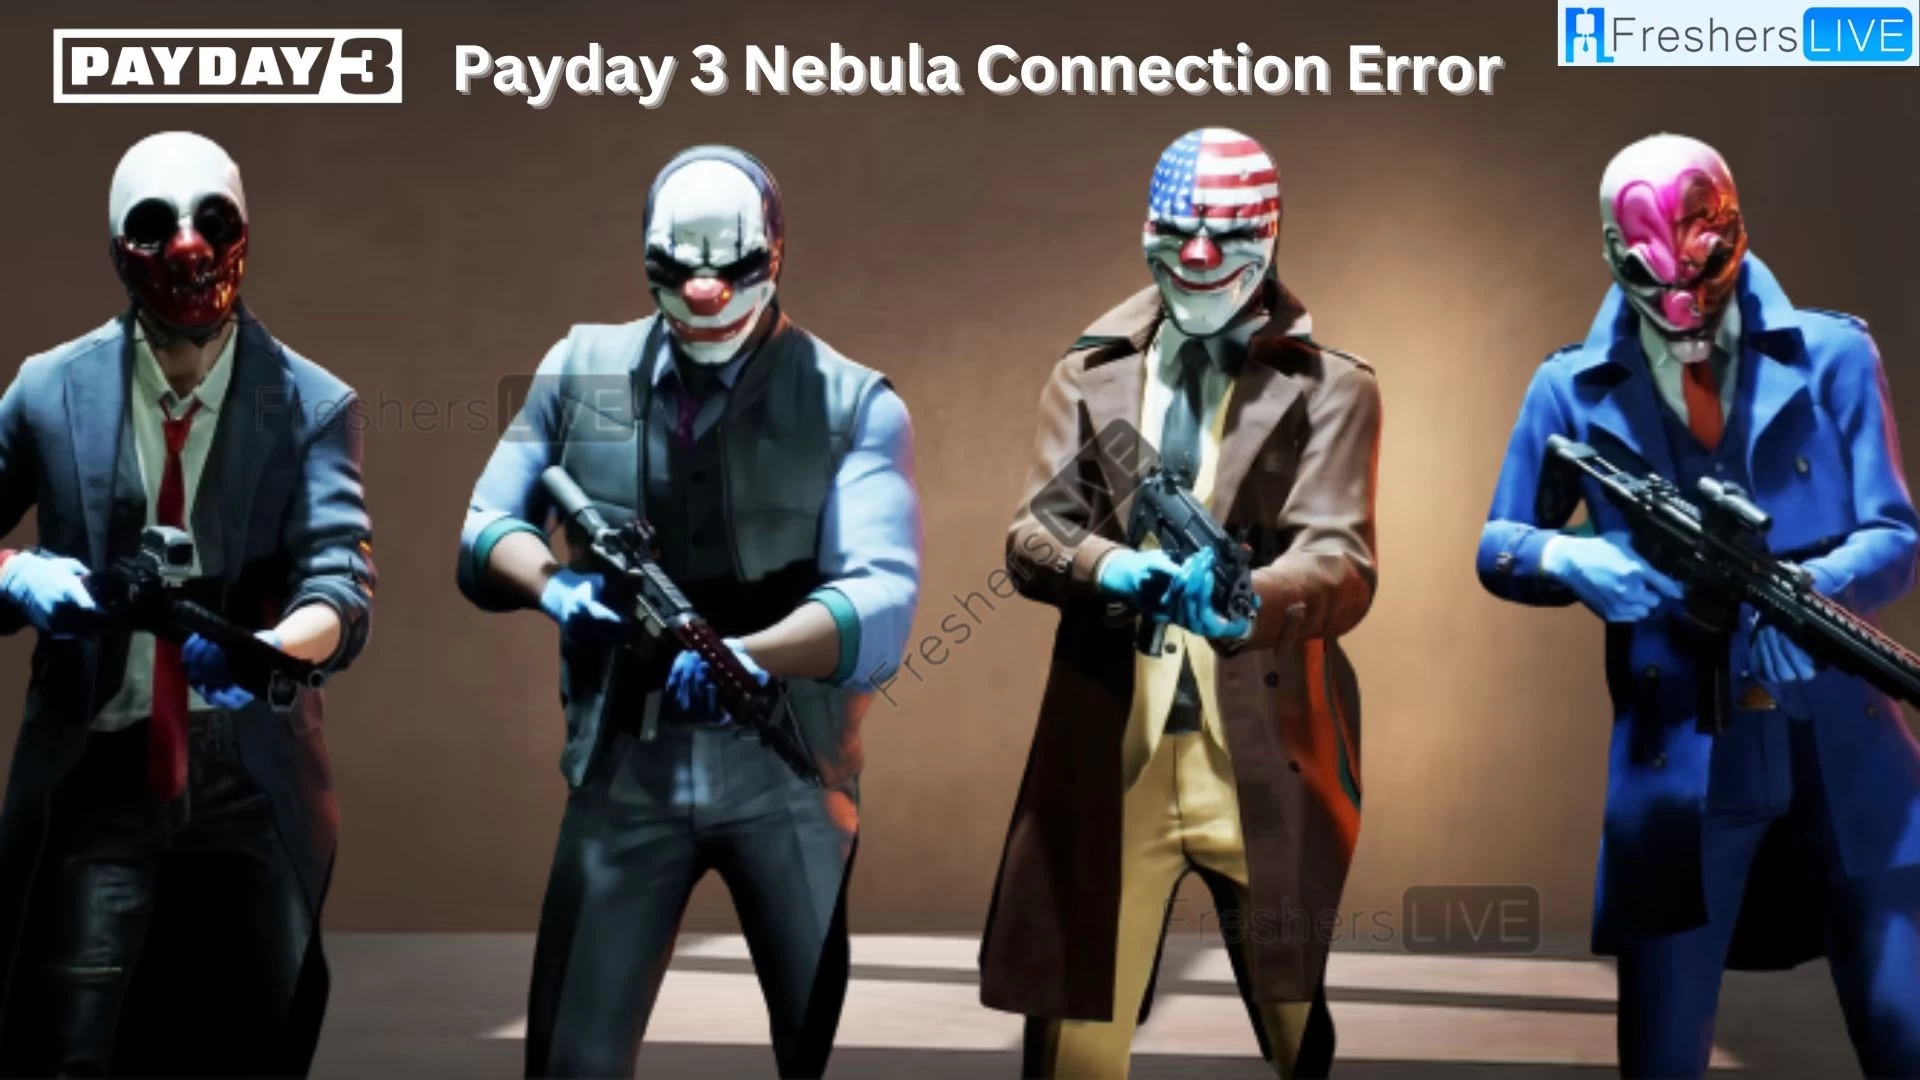 Payday 3 Nebula Connection Error, How to Fix Payday 3 Nebula Connection Error?